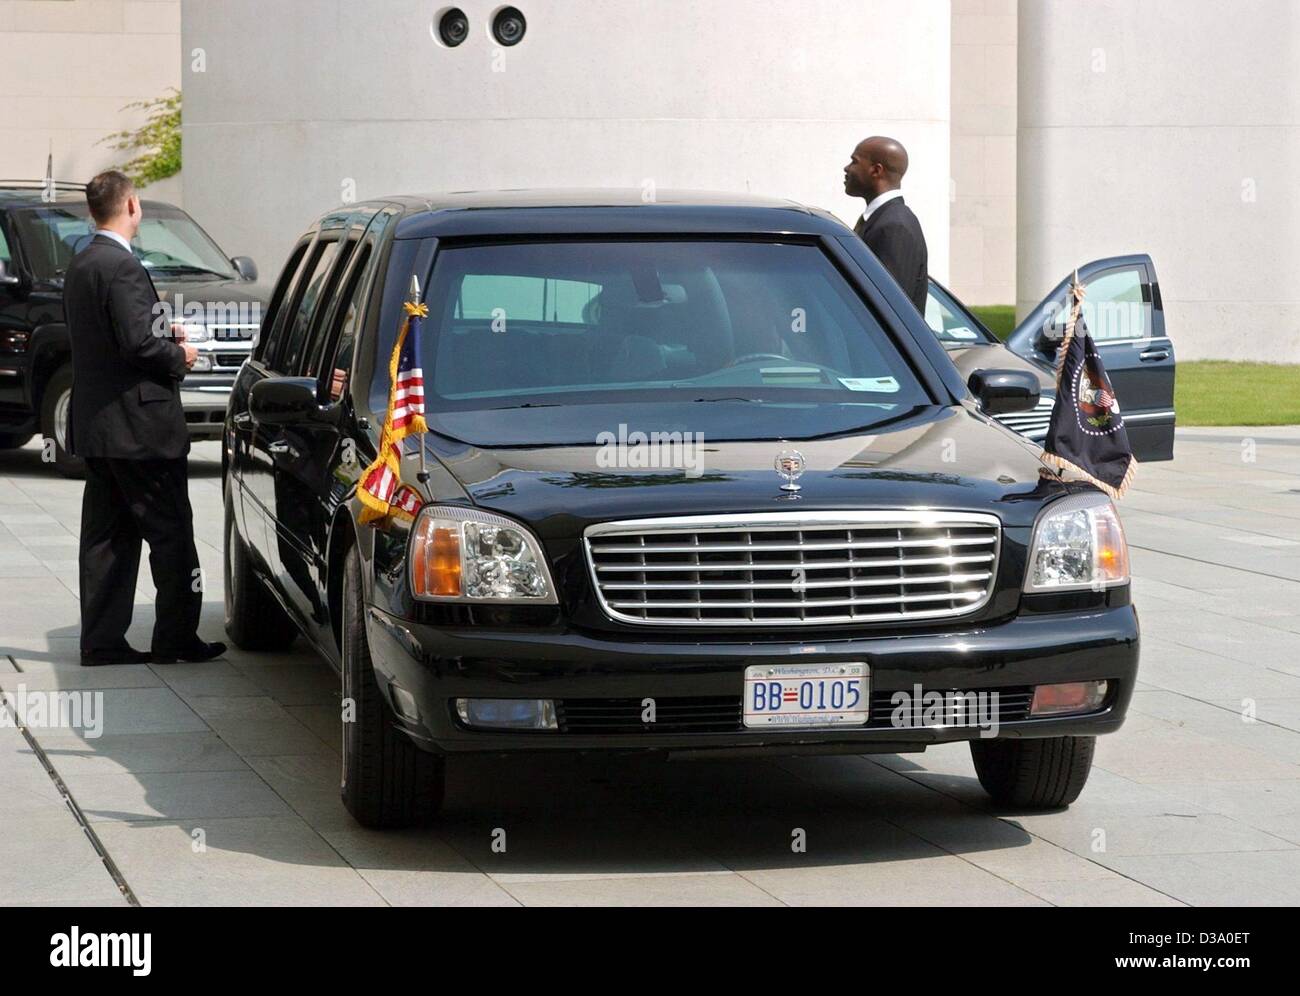 (dpa) - The bullet-proof limousine of US president Bush, waits in front of the chancellor's office, the 'Kanzleramt' in Berlin, 23 May 2002. Bush came on a one-week visit to Europe, the 24-hour stay in Germany being his first stop. The car is part of his travelling entourage. Stock Photo